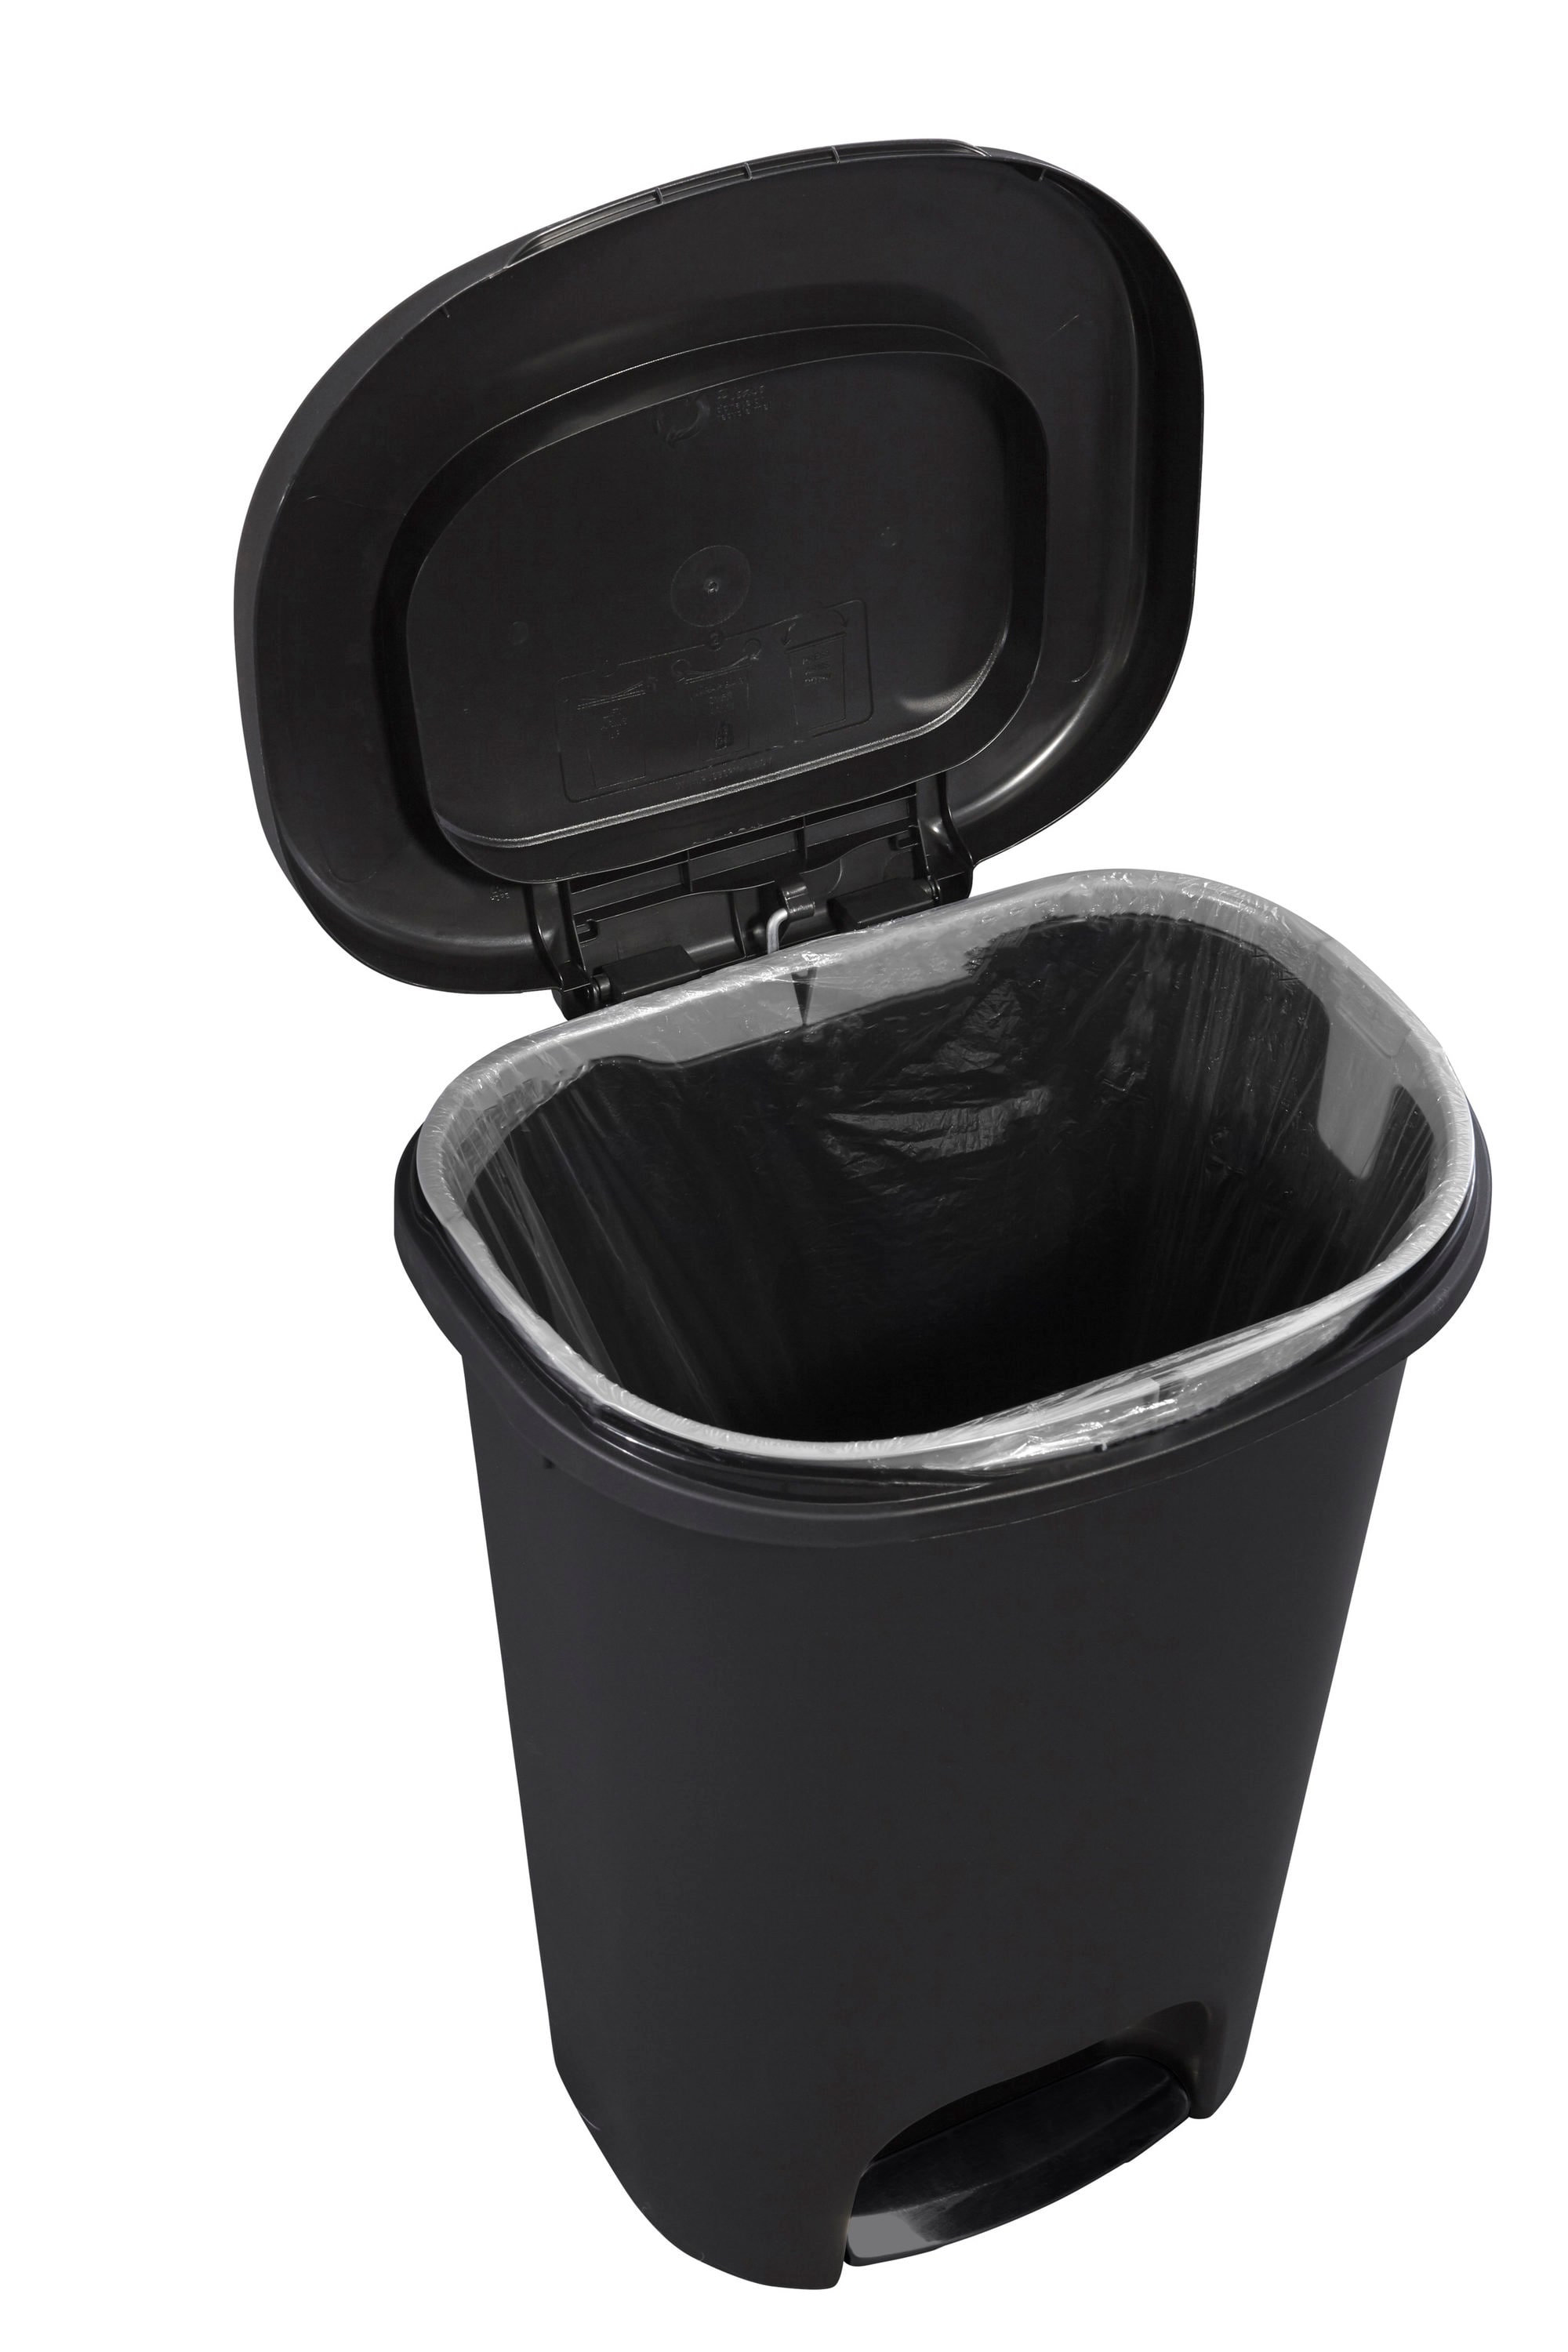 Rubbermaid Classic 13 Gallon Premium Step-On Trash Can with Lid and  Stainless-Steel Pedal, Black Waste Bin for Kitchen